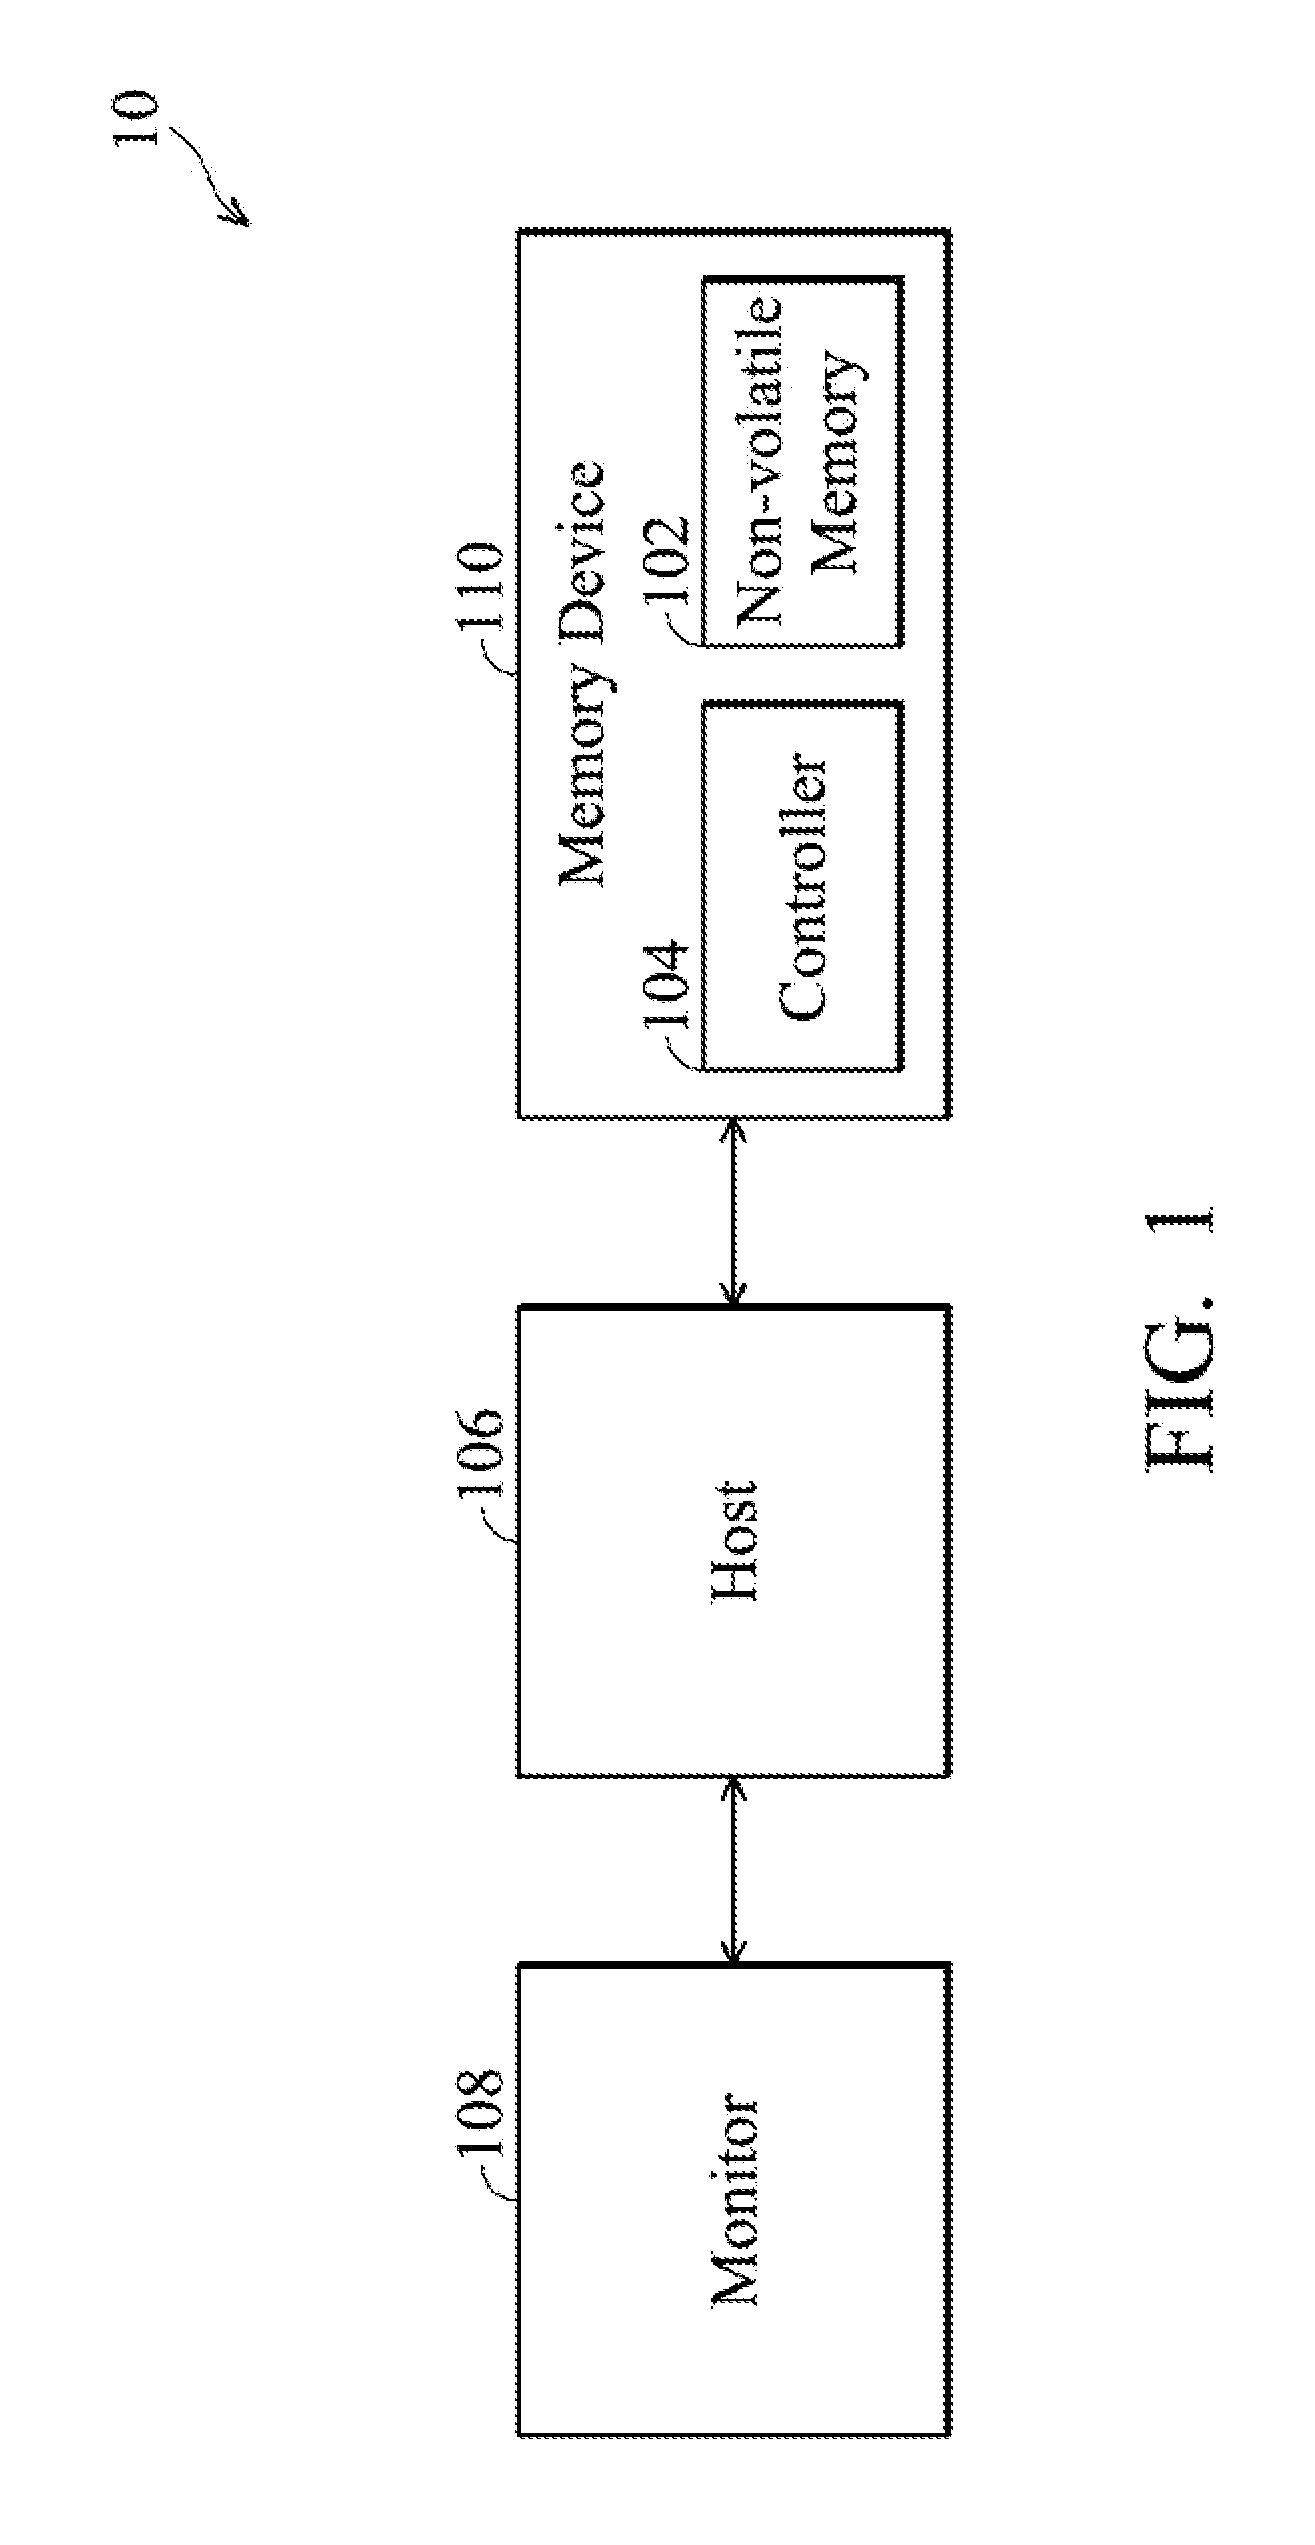 Methods for measuring usable lifespan and replacing an in-system programming code of a memory device, and data storage system using the same